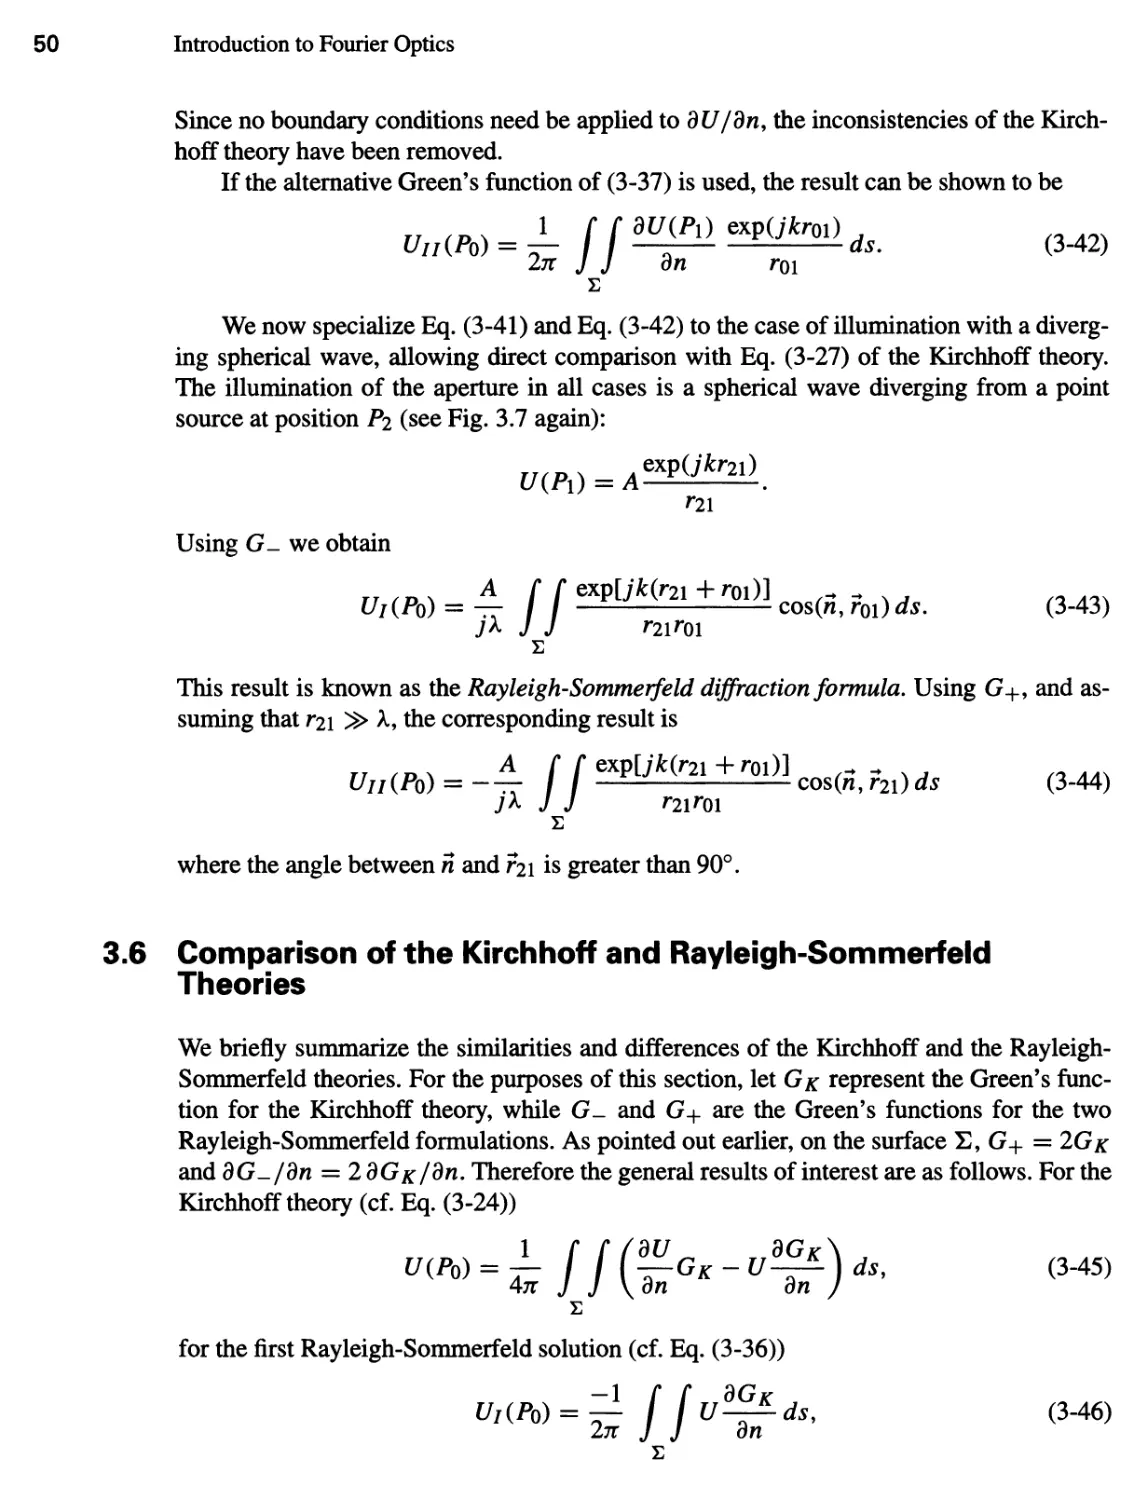 3.6 Comparison of the Kirchhoff and Rayleigh-Sommerfeld Theories 50